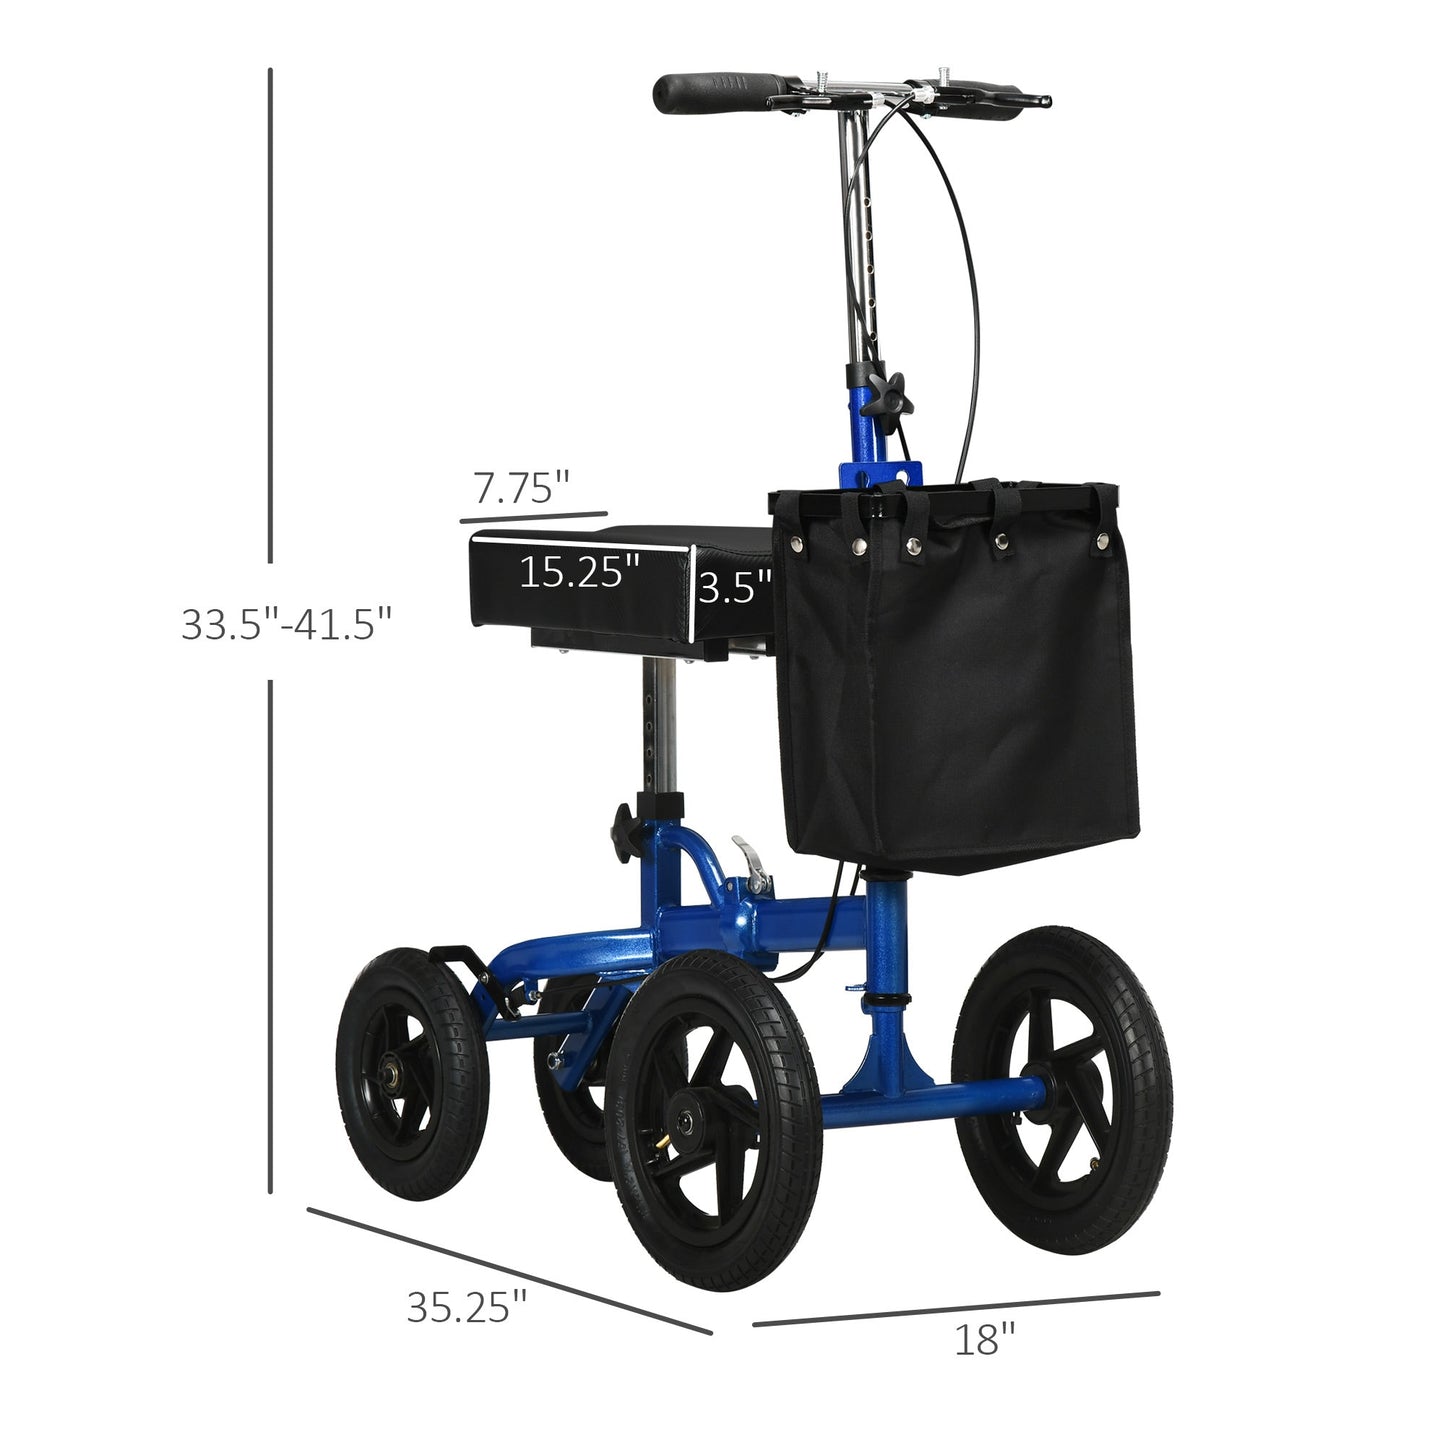 -HOMCOM Knee Scooter with Basket Storage, Walker Mobility During Medical Rehabilitation & Injury, Folding for Transport, Blue - Outdoor Style Company